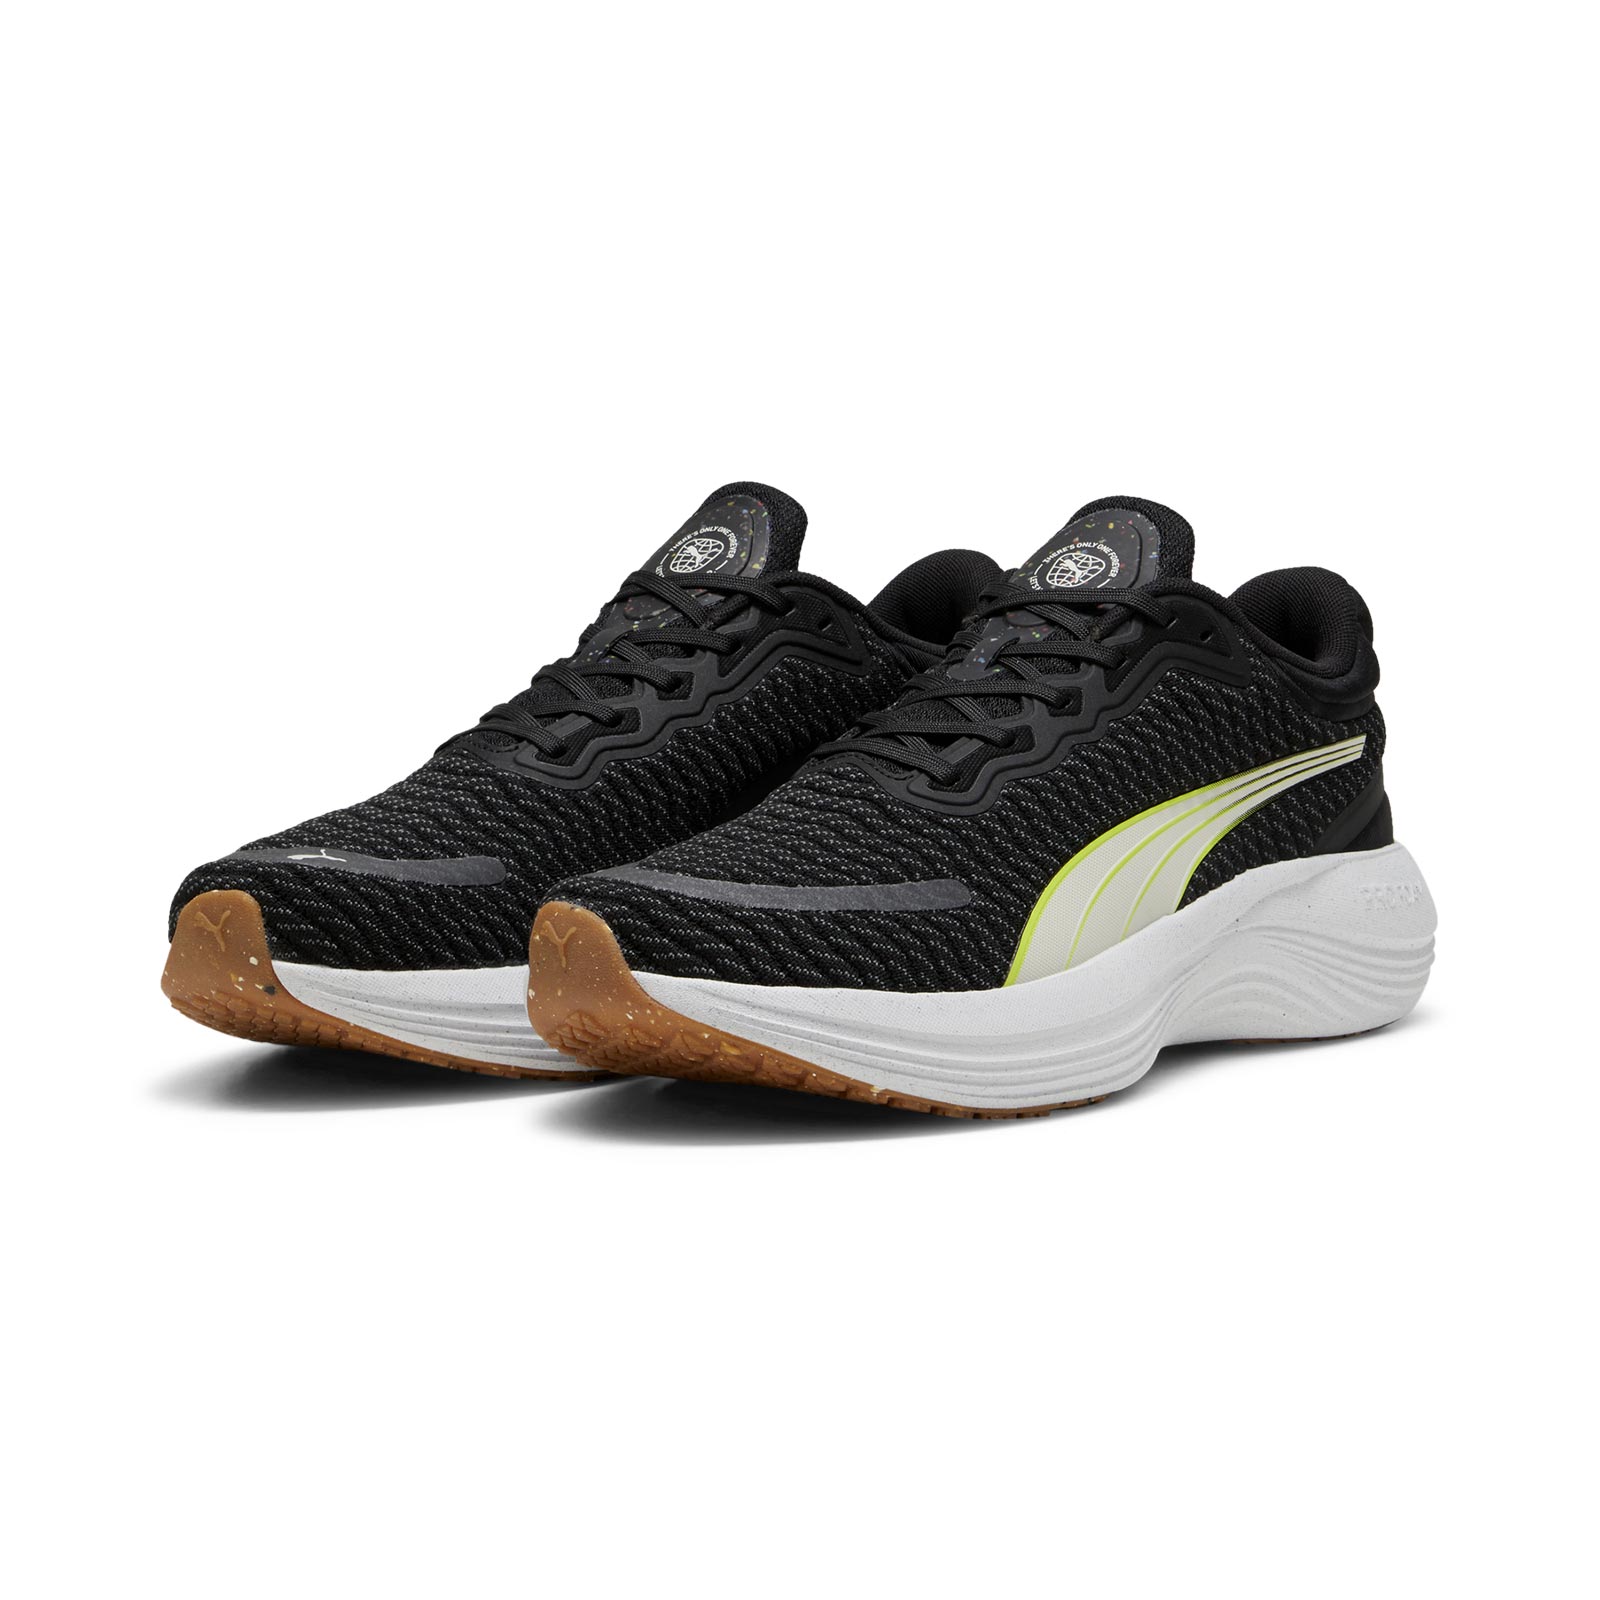 PUMA SCEND PRO KNIT MENS RUNNING SHOES